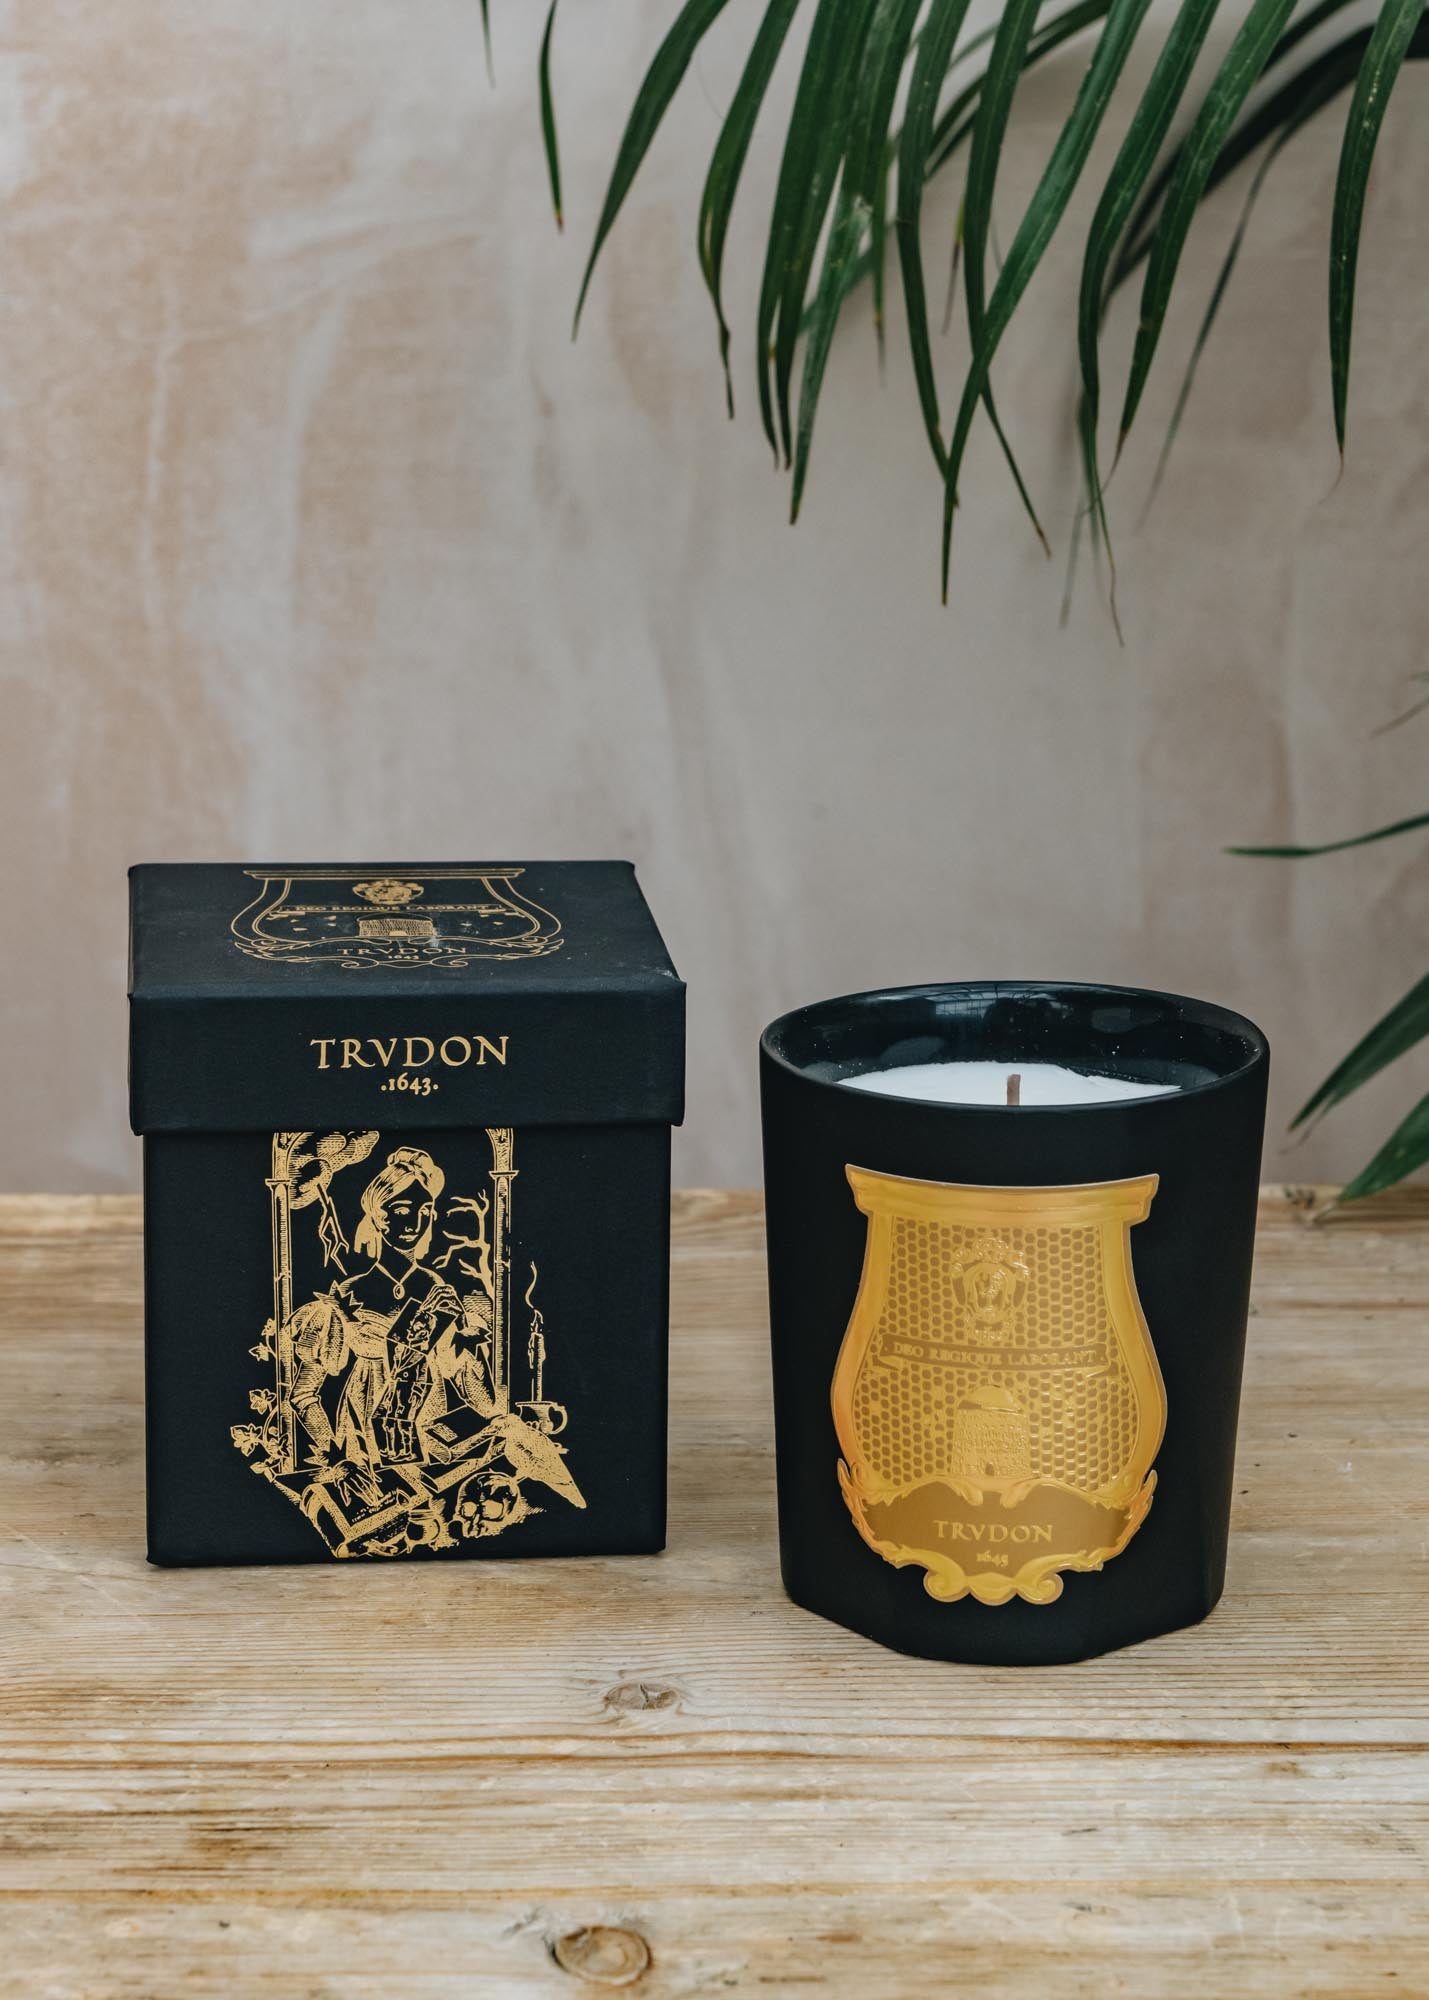 Trudon Classic Scented Candle in Mary